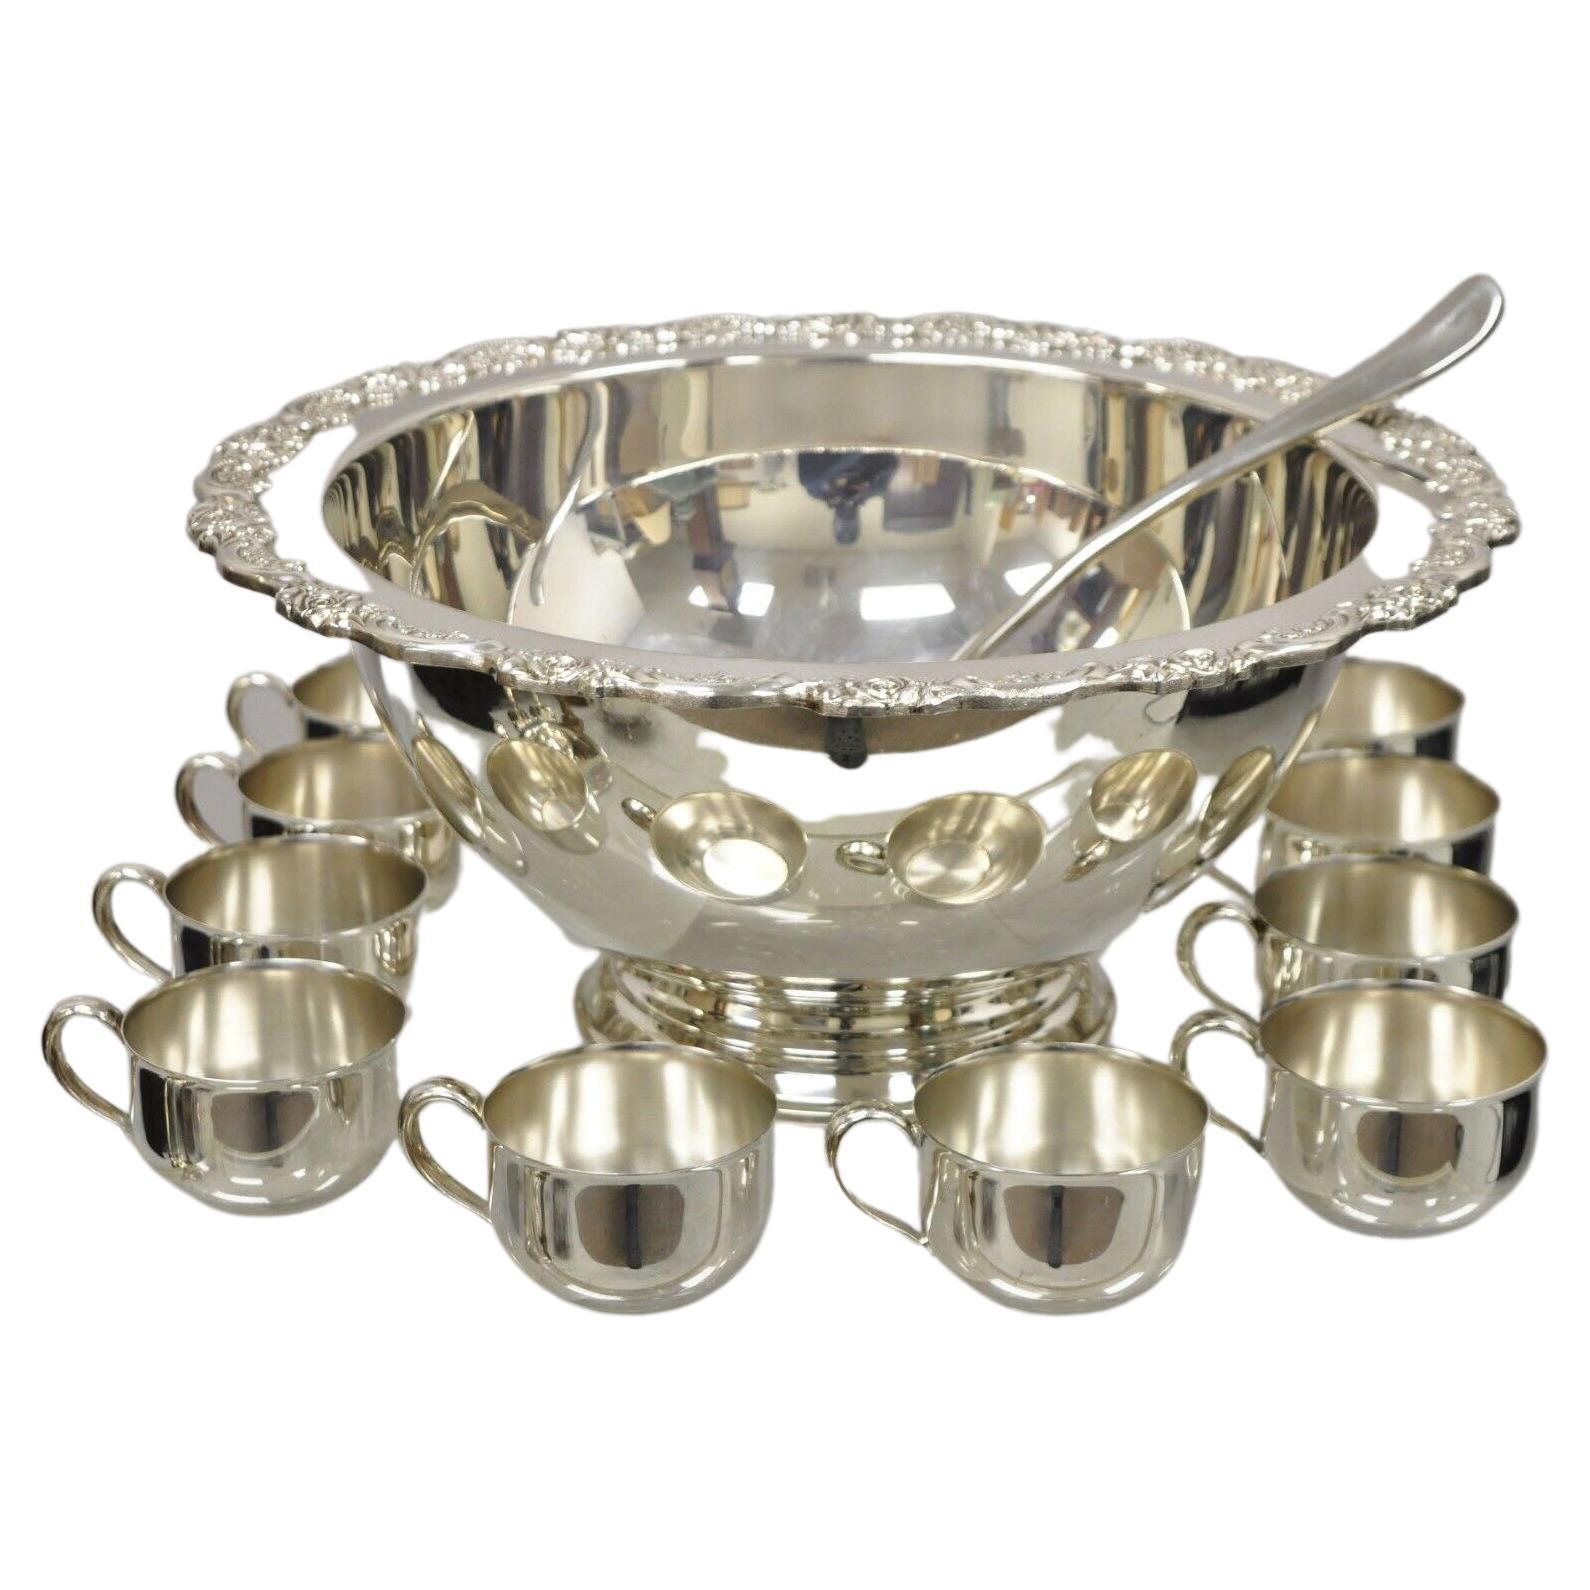 Oneida Silver Plated Punch Bowl Set with 12 Cups and Ladle